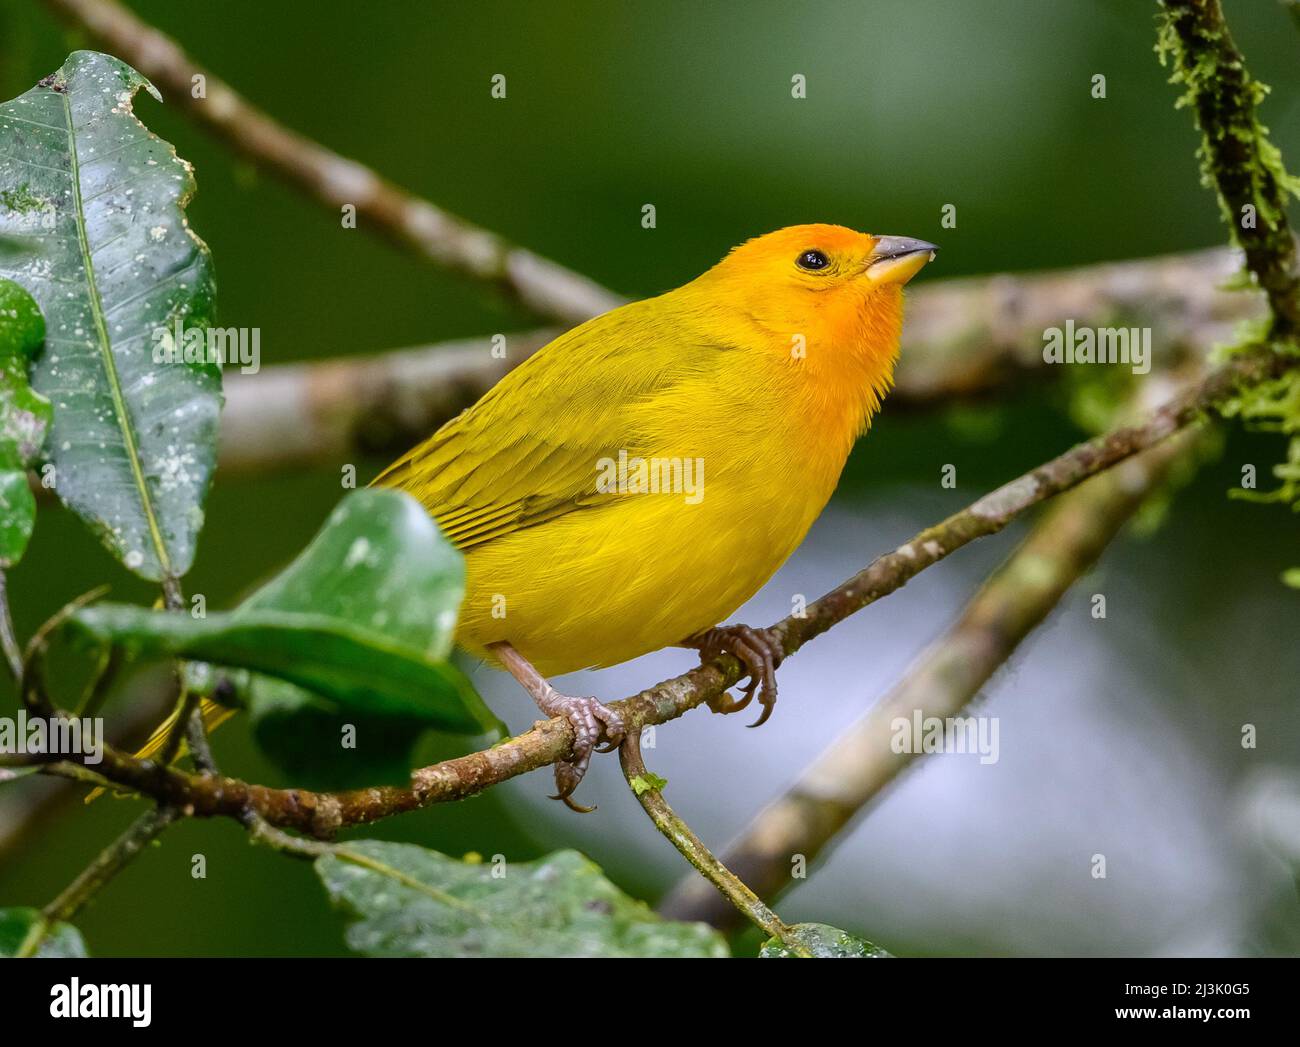 A Saffron Finch (Sicalis flaveola) perched on a branch. Colombia, South America. Stock Photo